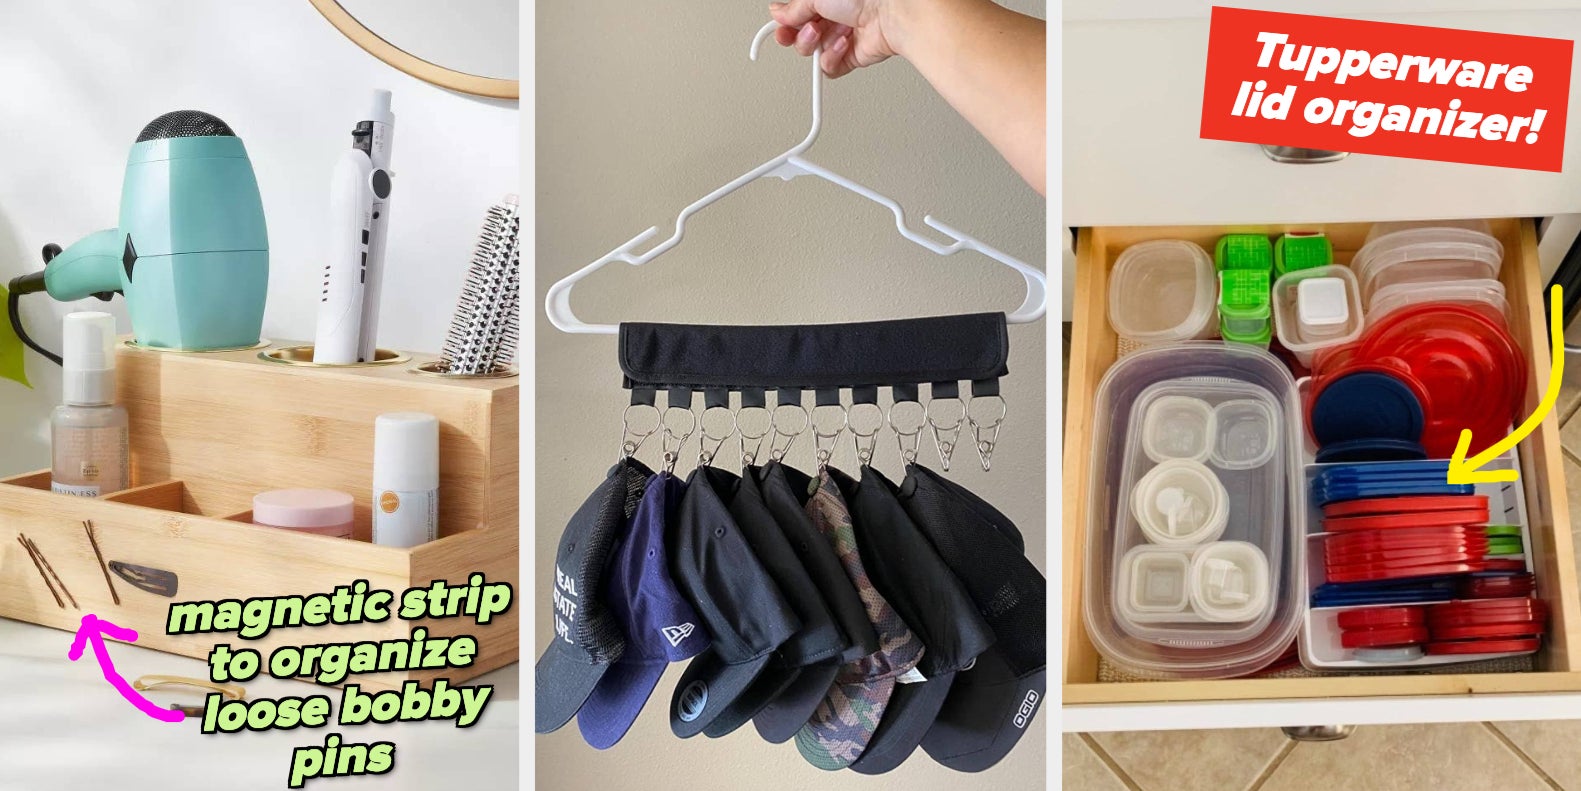 Bobby Pin Storage - 31 Days of Organizing and Cleaning Hacks